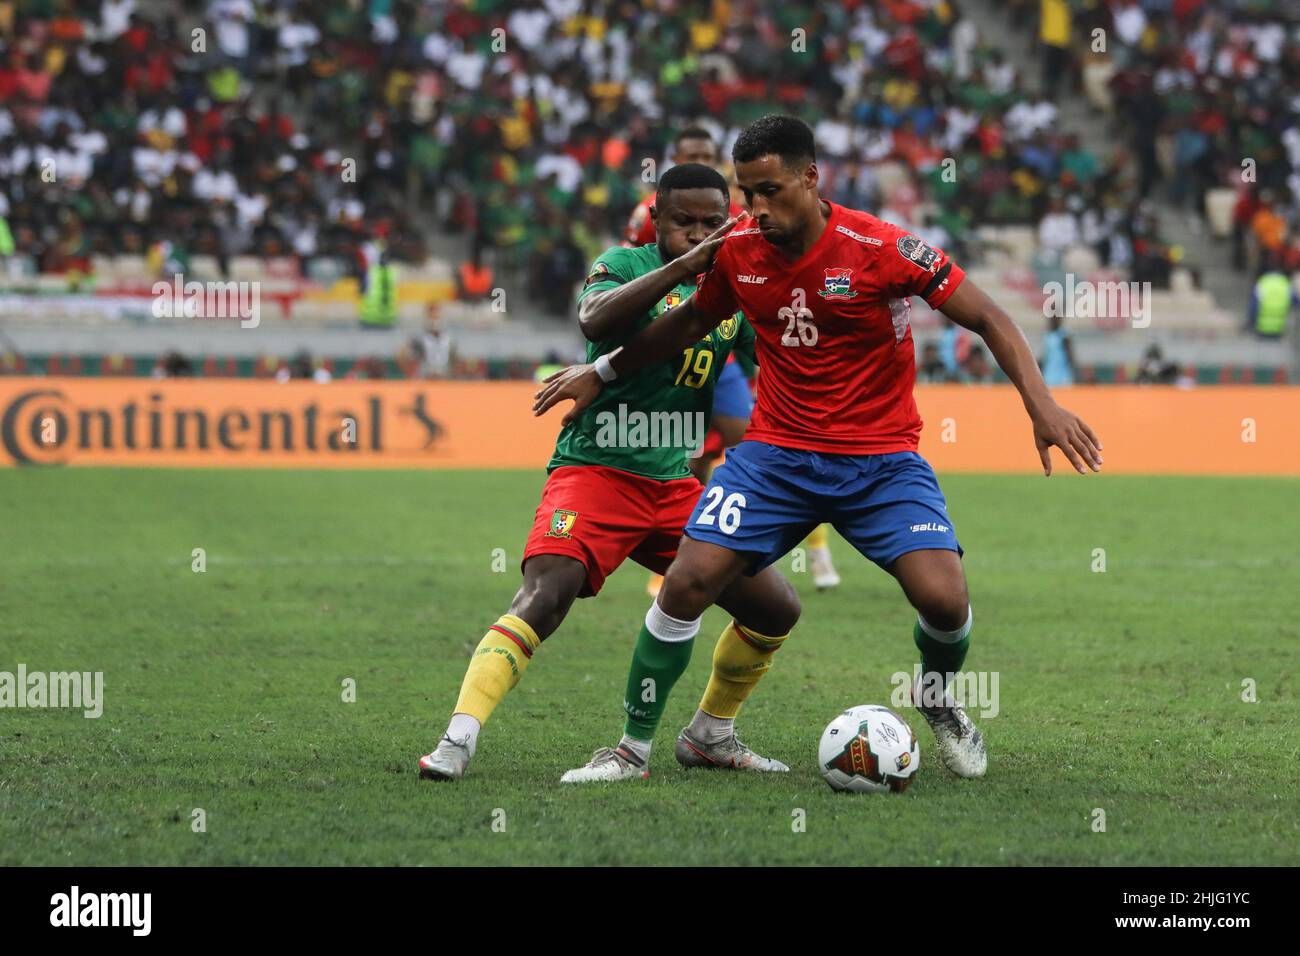 Cameroon, Douala, 29 January 2022 - Collins Fai of Cameroon and Ibou Touray of Gambia in action during the Africa Cup on Nations Play Offs - Quarter-finals match between Gambia and Cameroon at Japoma Stadium, Douala, Cameroon 29/01/2022 Photo SF Credit: Sebo47/Alamy Live News Stock Photo